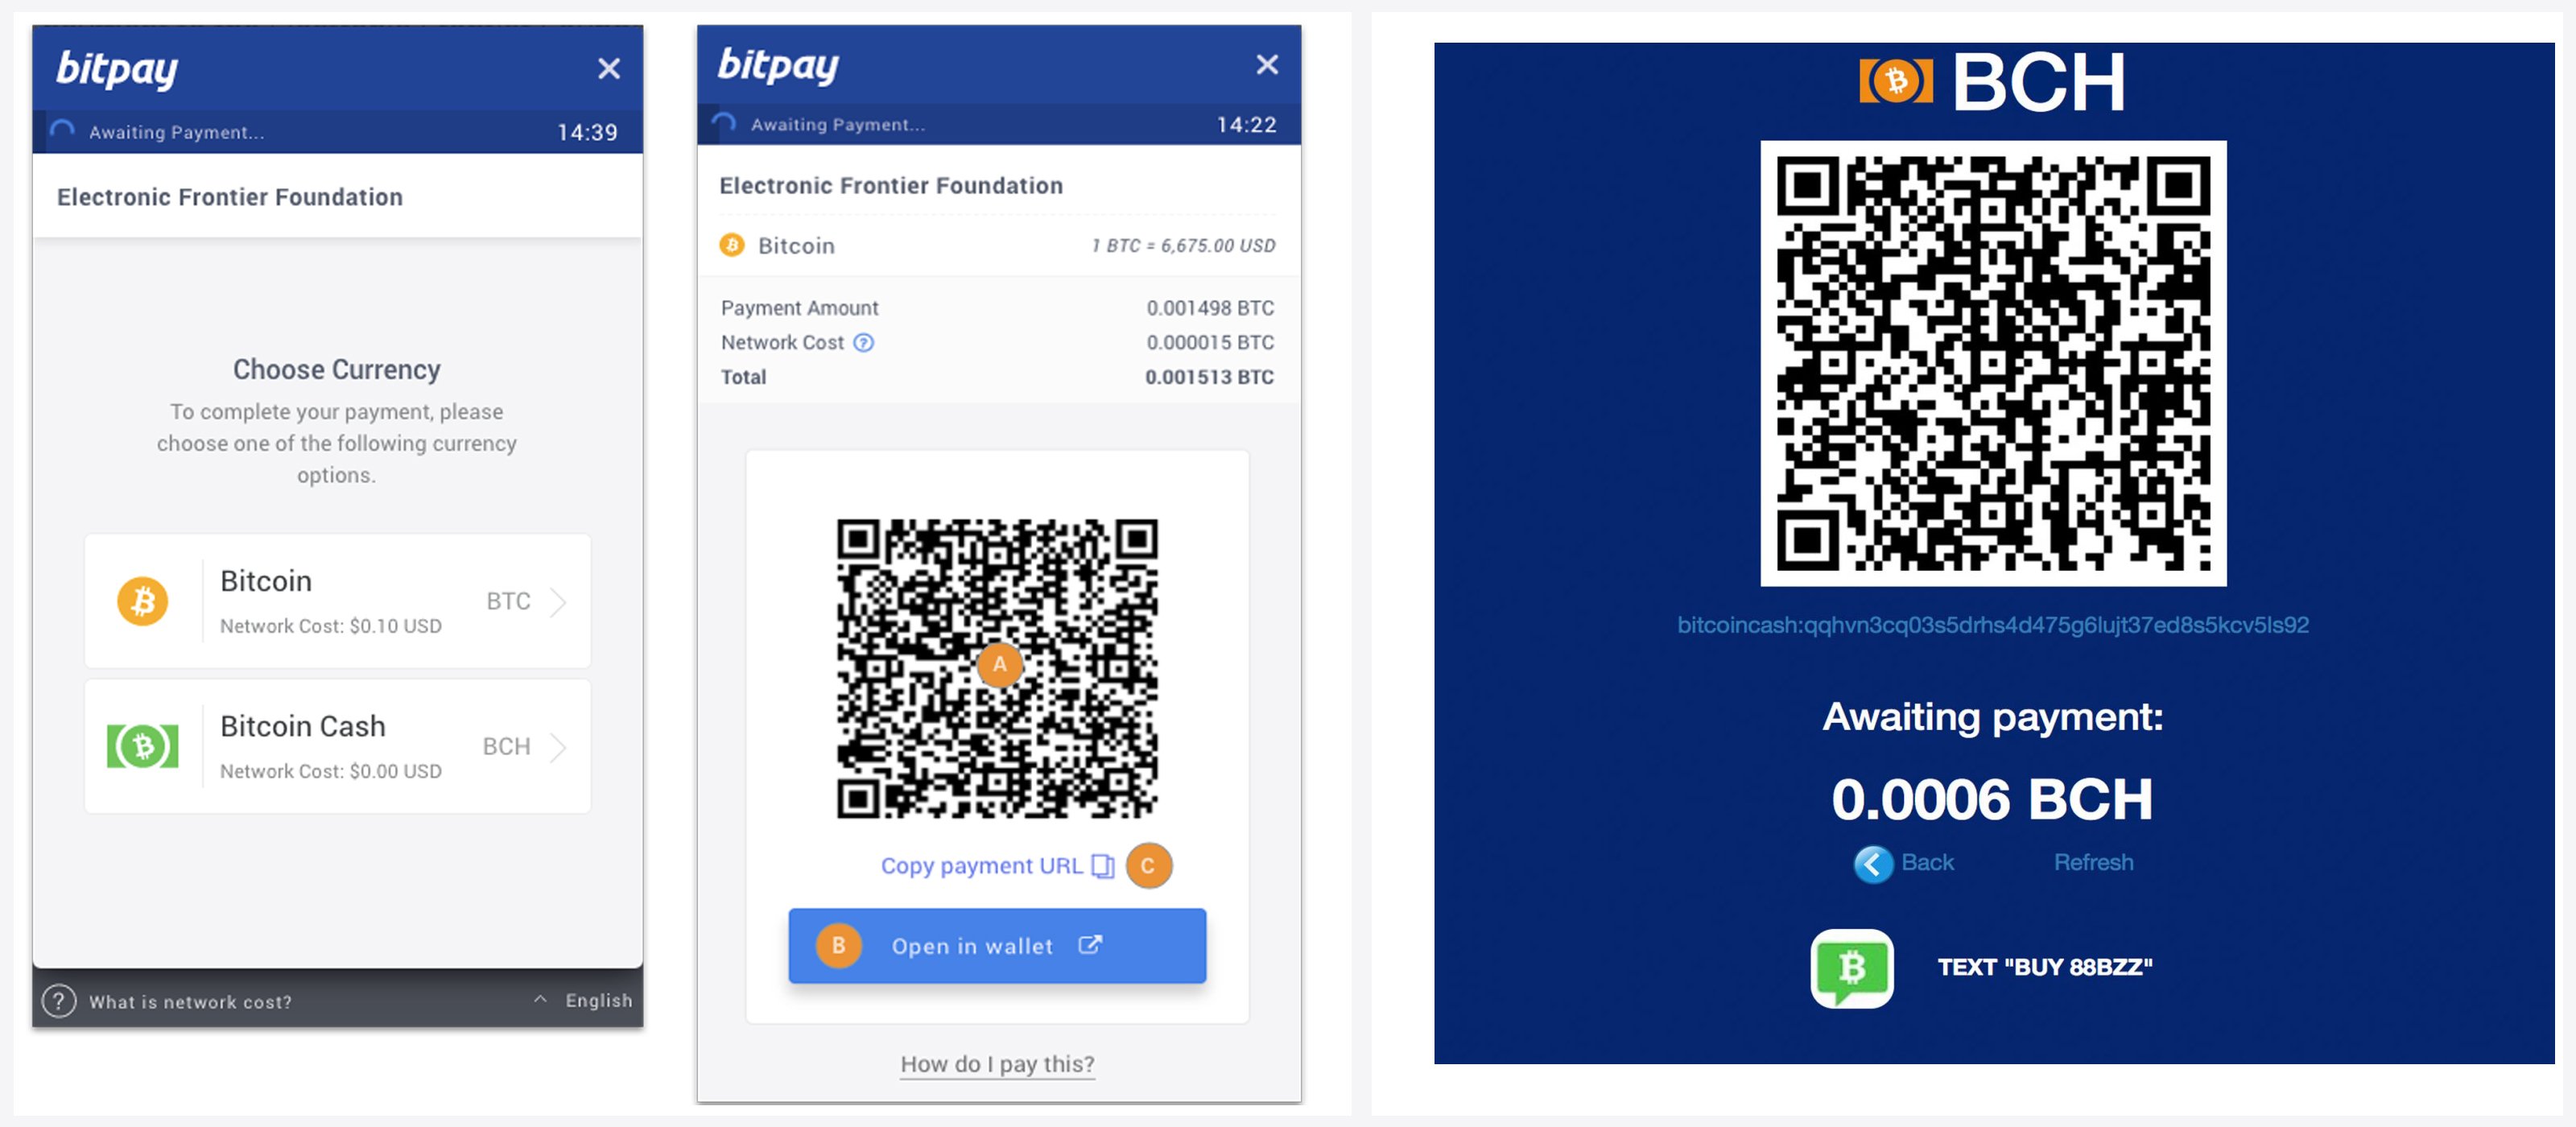 Cointext Adds the Ability to Pay Bitpay Invoices Using SMS